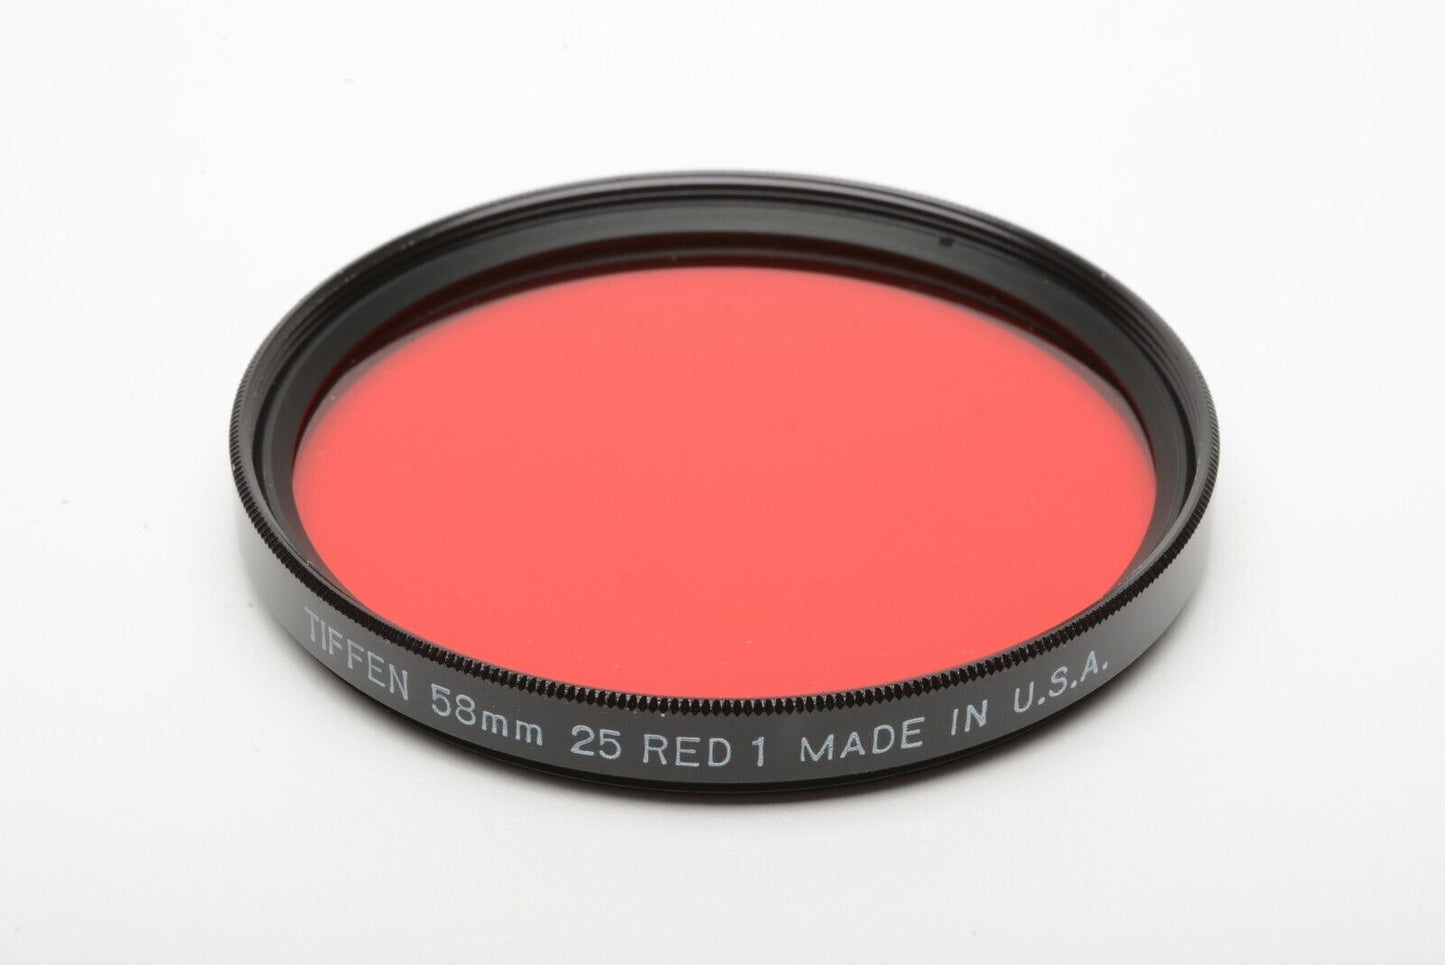 EXC+++ 58mm TIFFEN B&W CONTRAST FILTERS: YELLOW+ORANGE+RED, BARELY USED